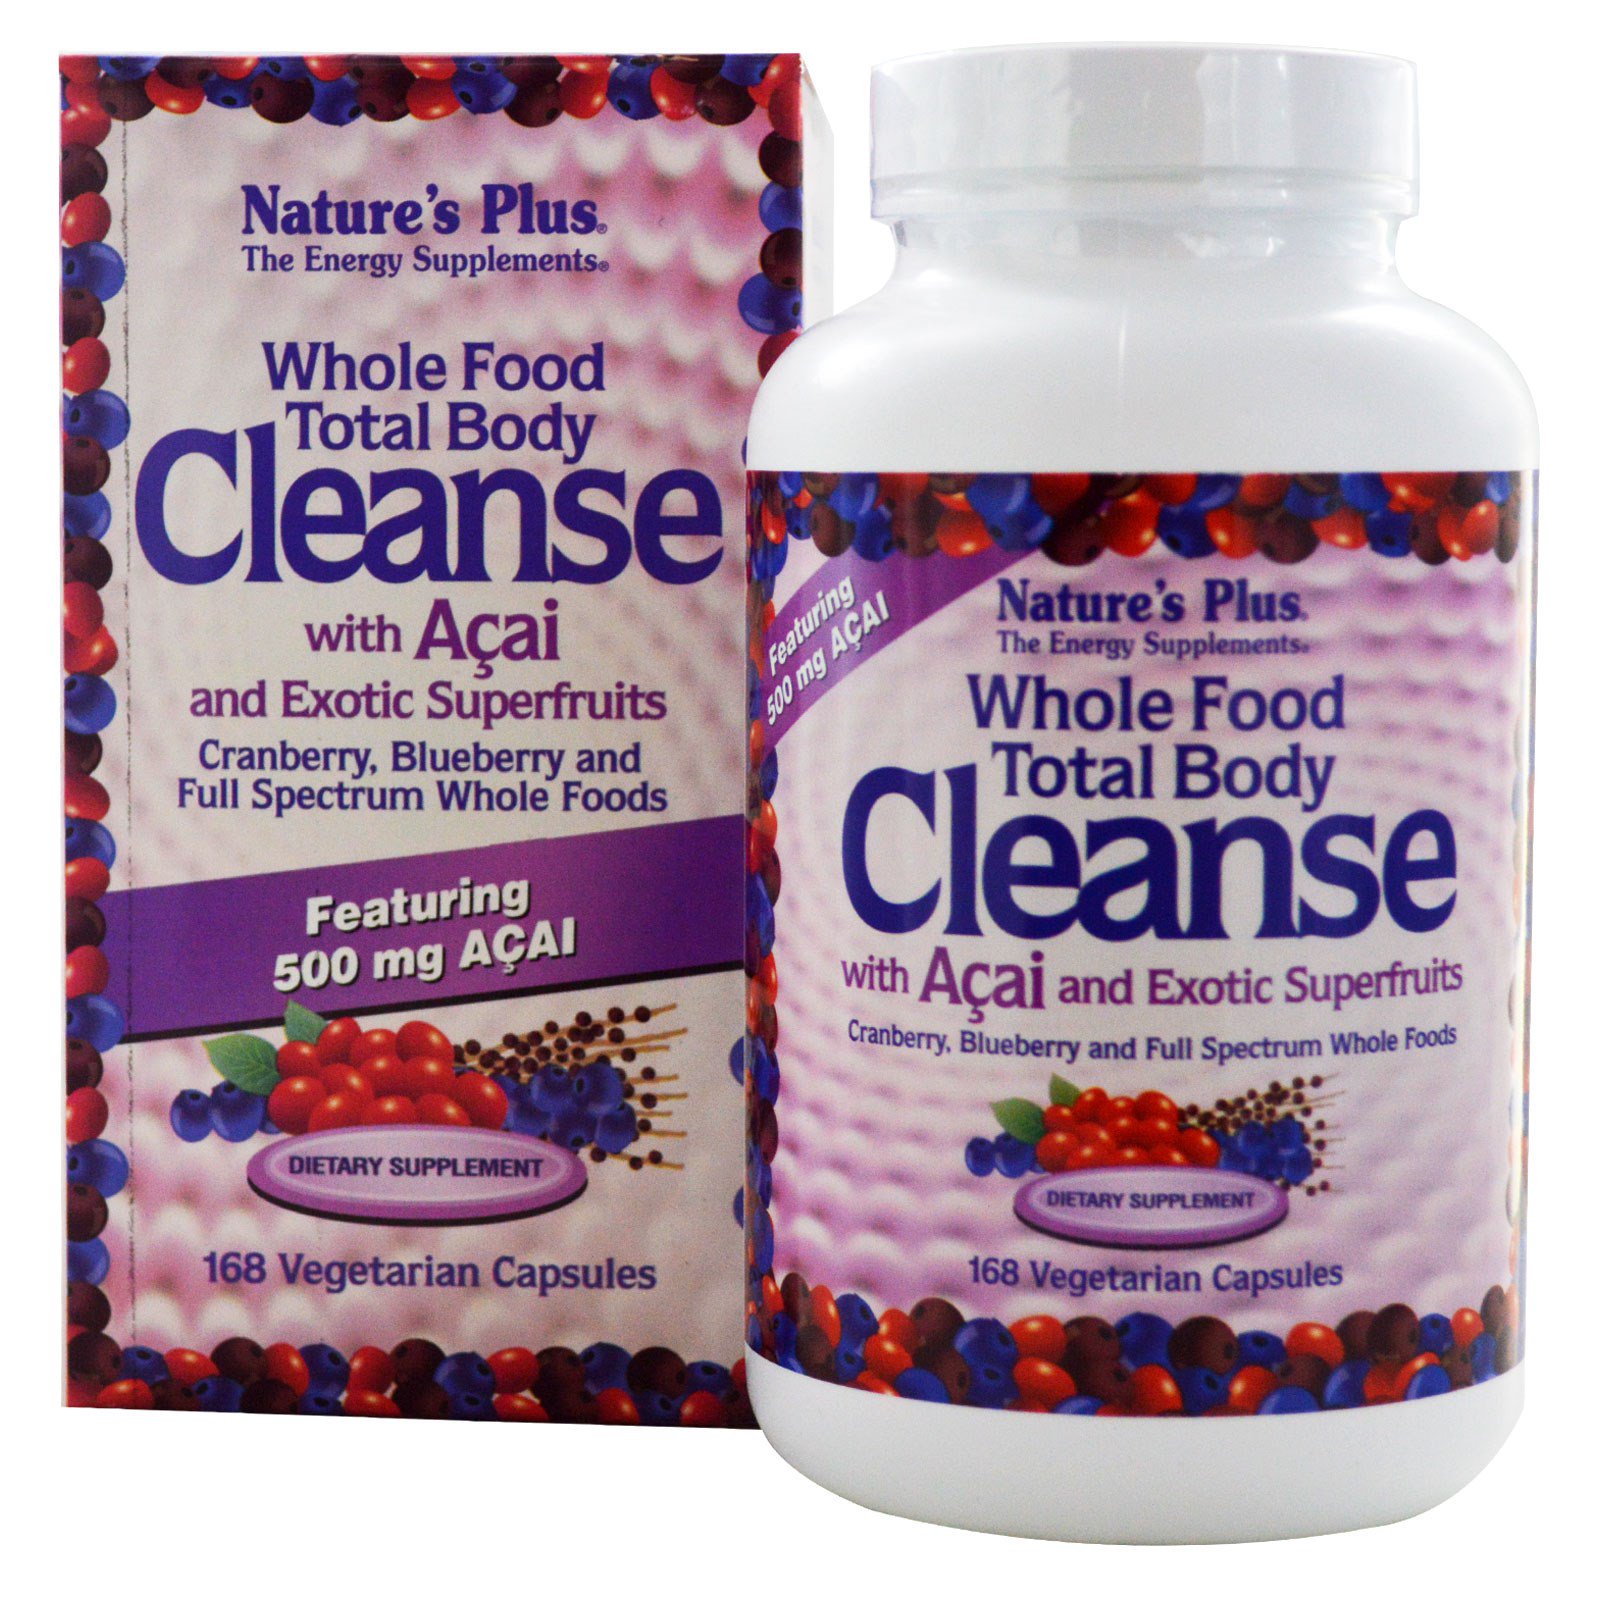 Body cleanse